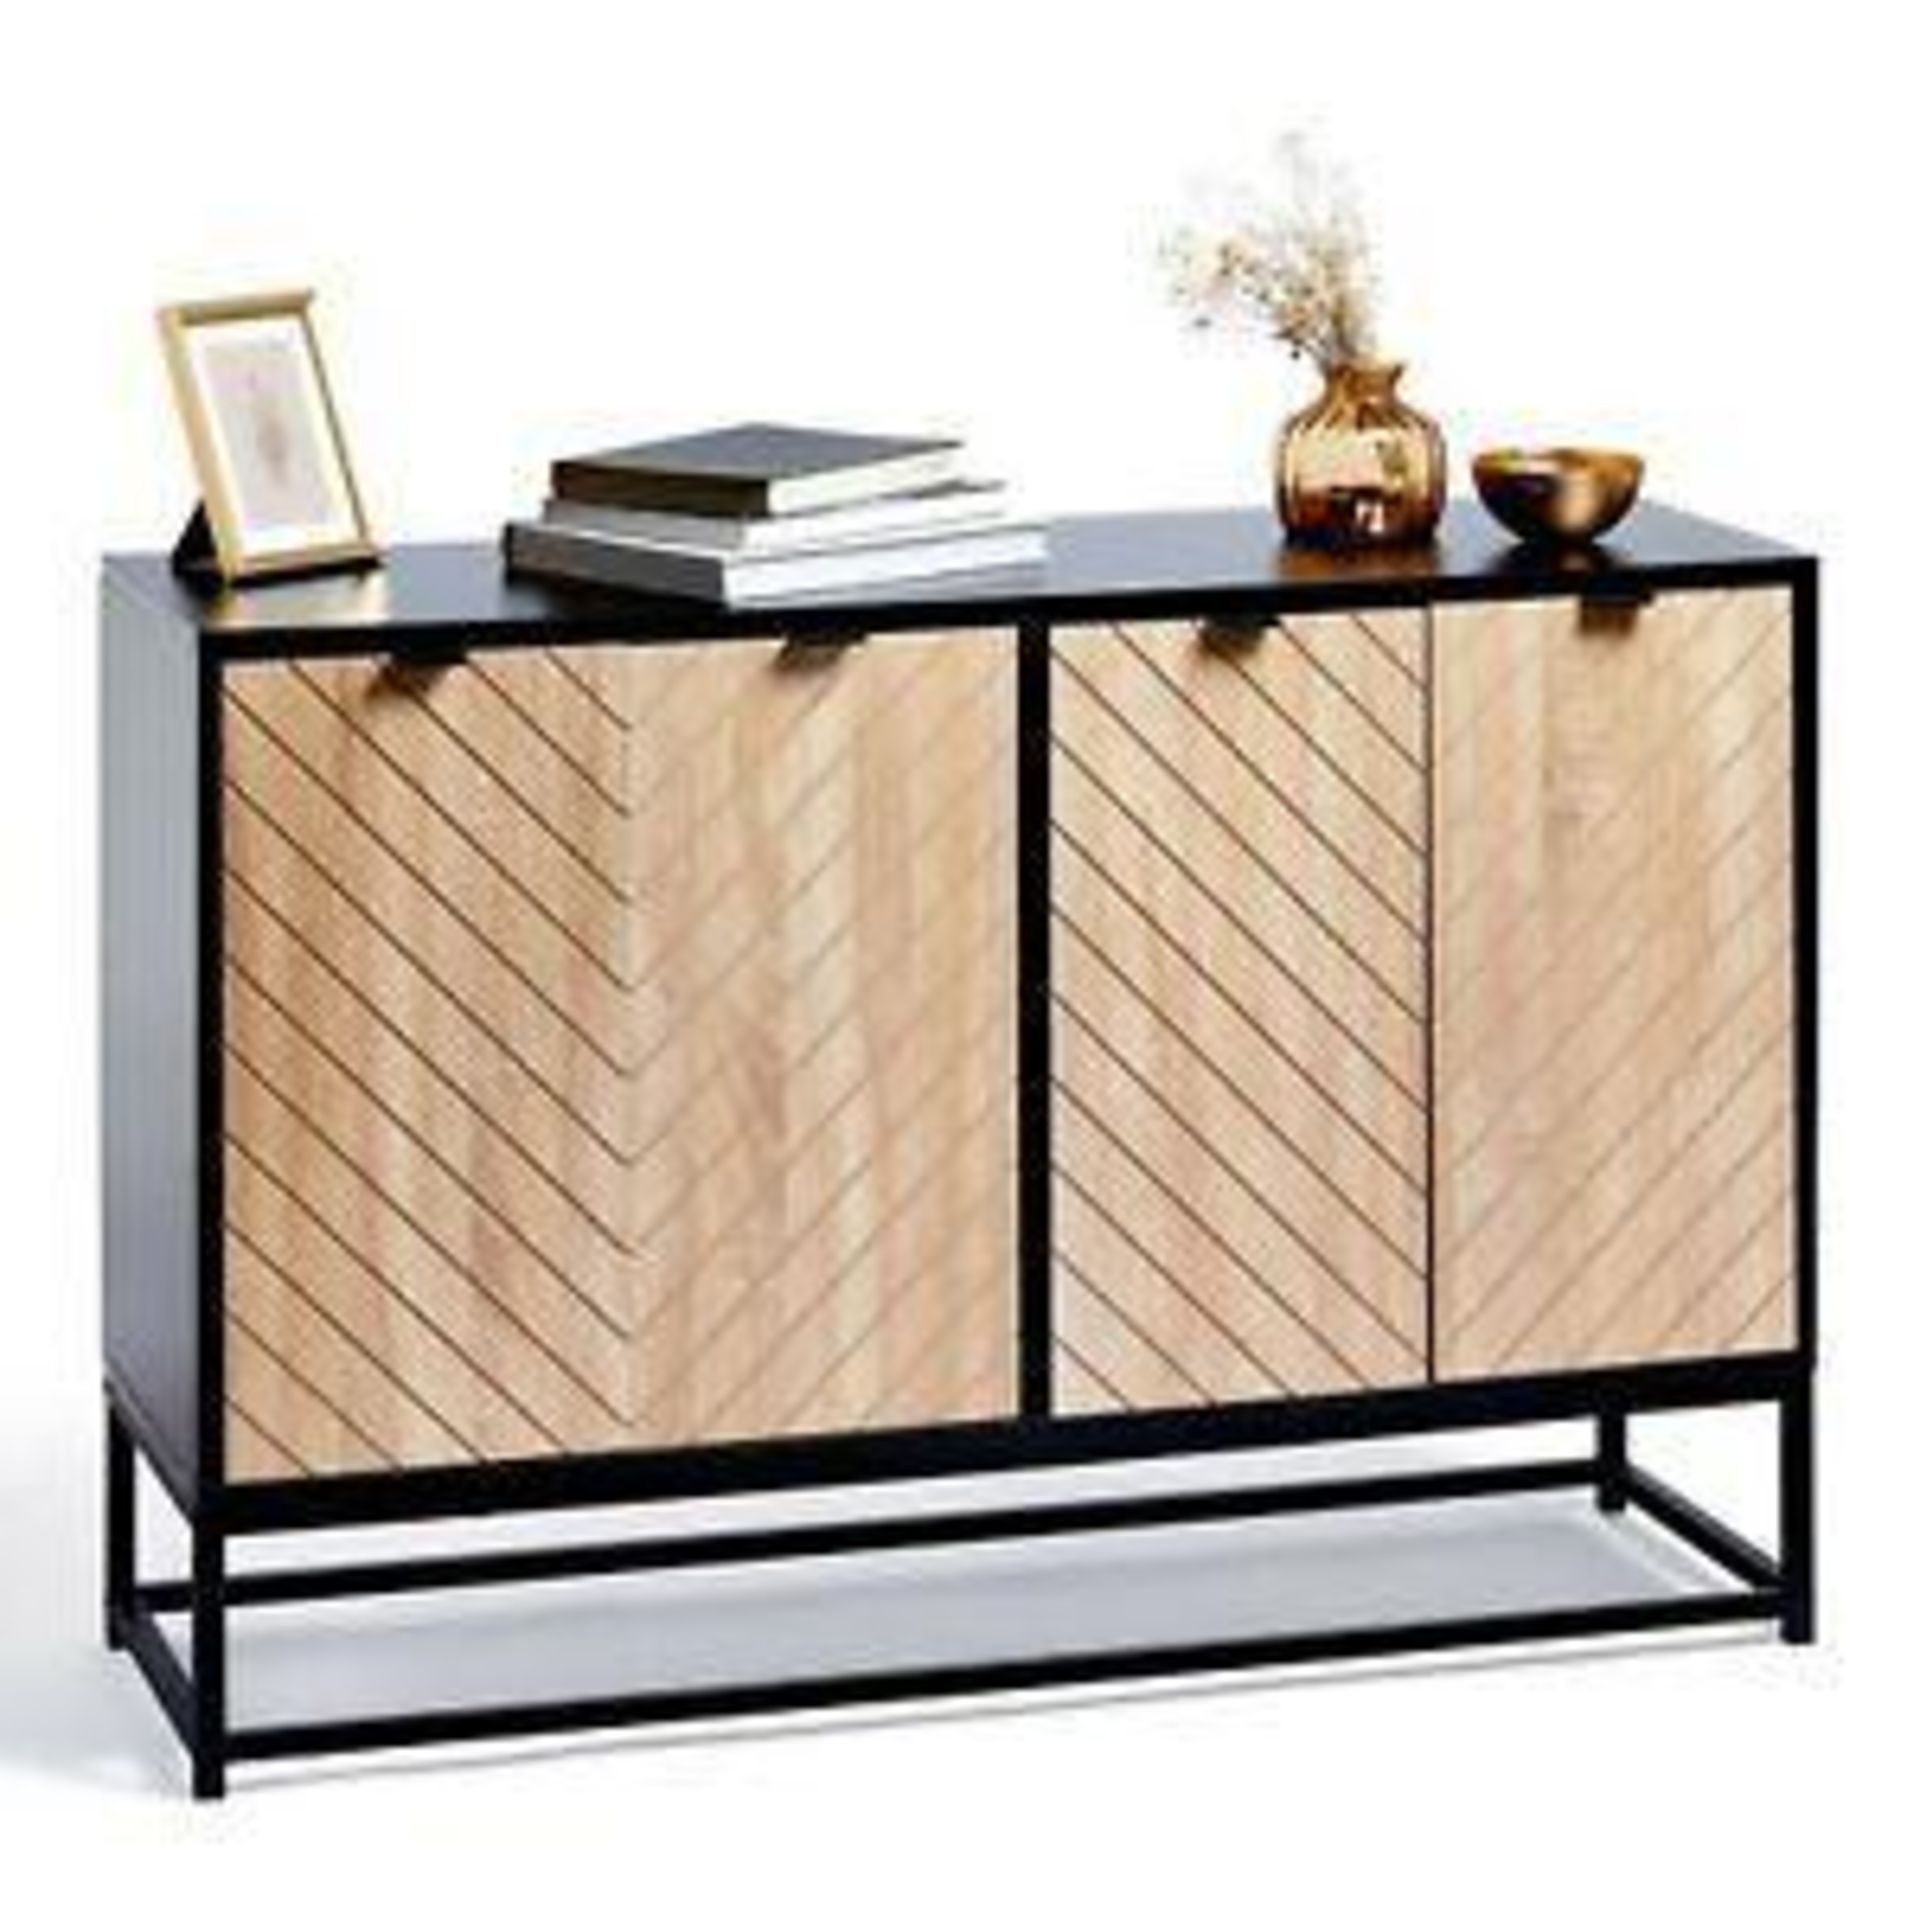 Sideboard Storage Cabinet (ER35) Specifications: Colour: Black And Natural WoodWeight (g): 34.5gPack